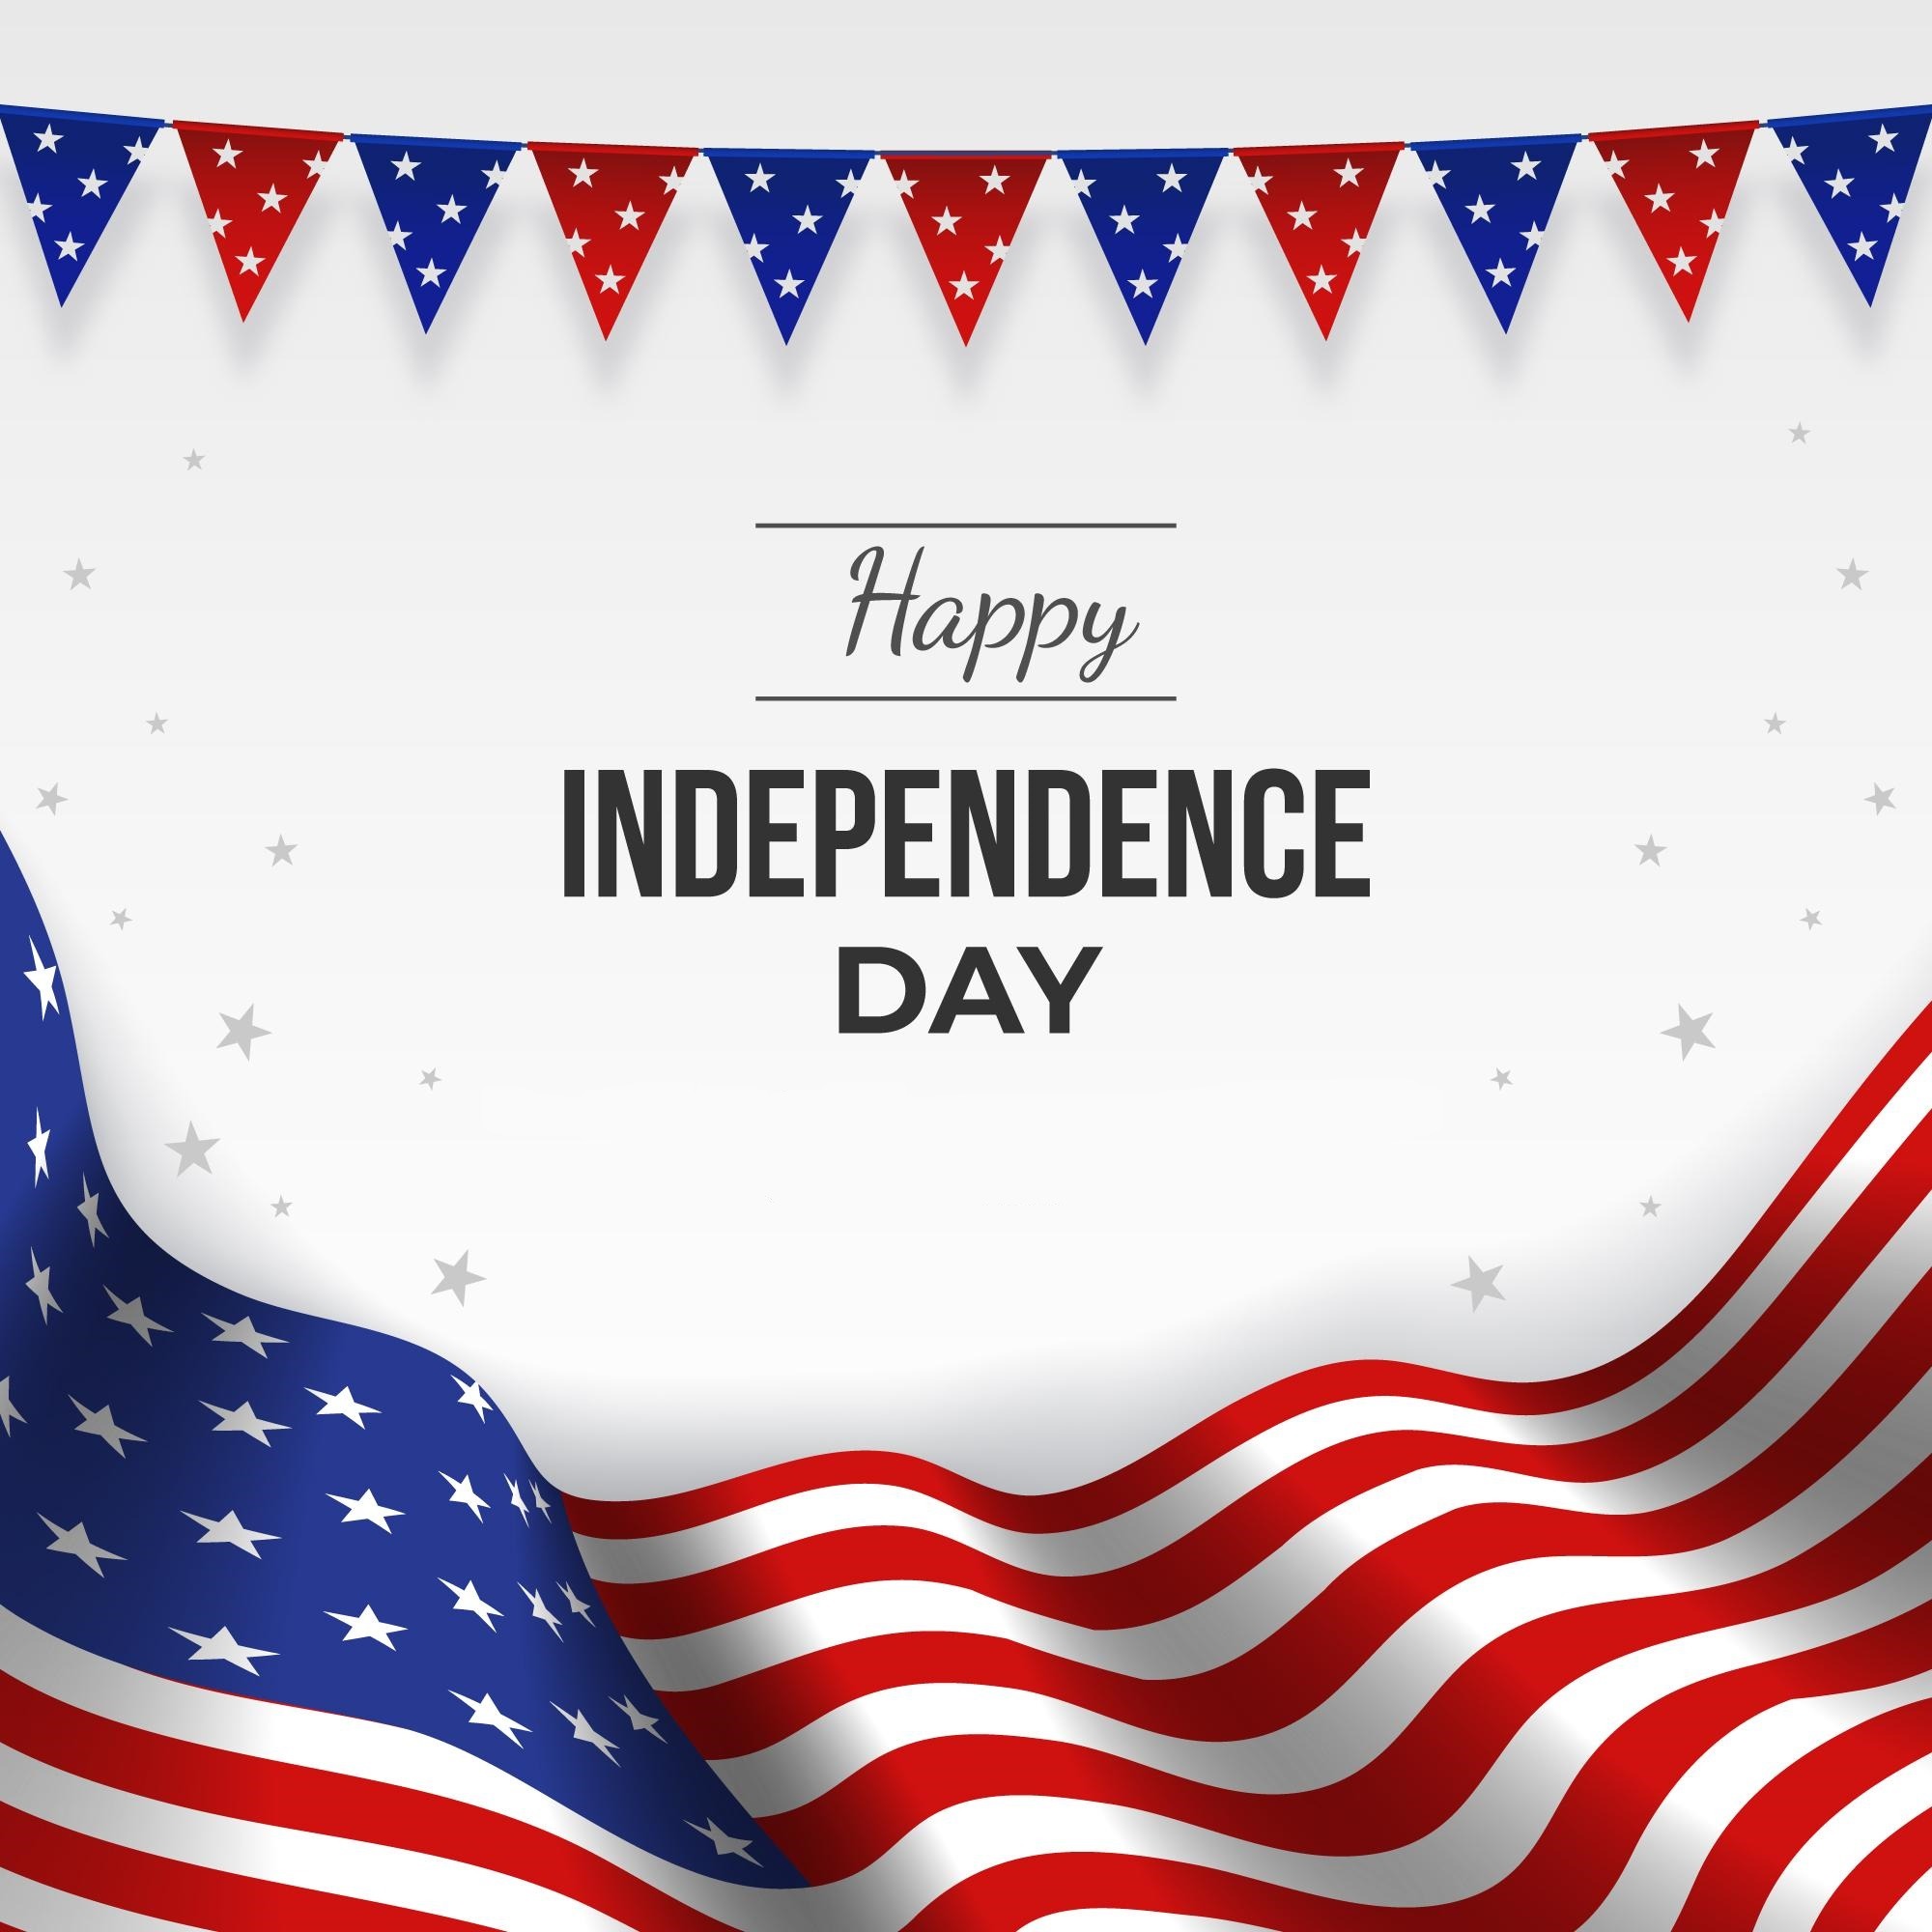 Happy Independence Day America 2021 Photo & Image Download